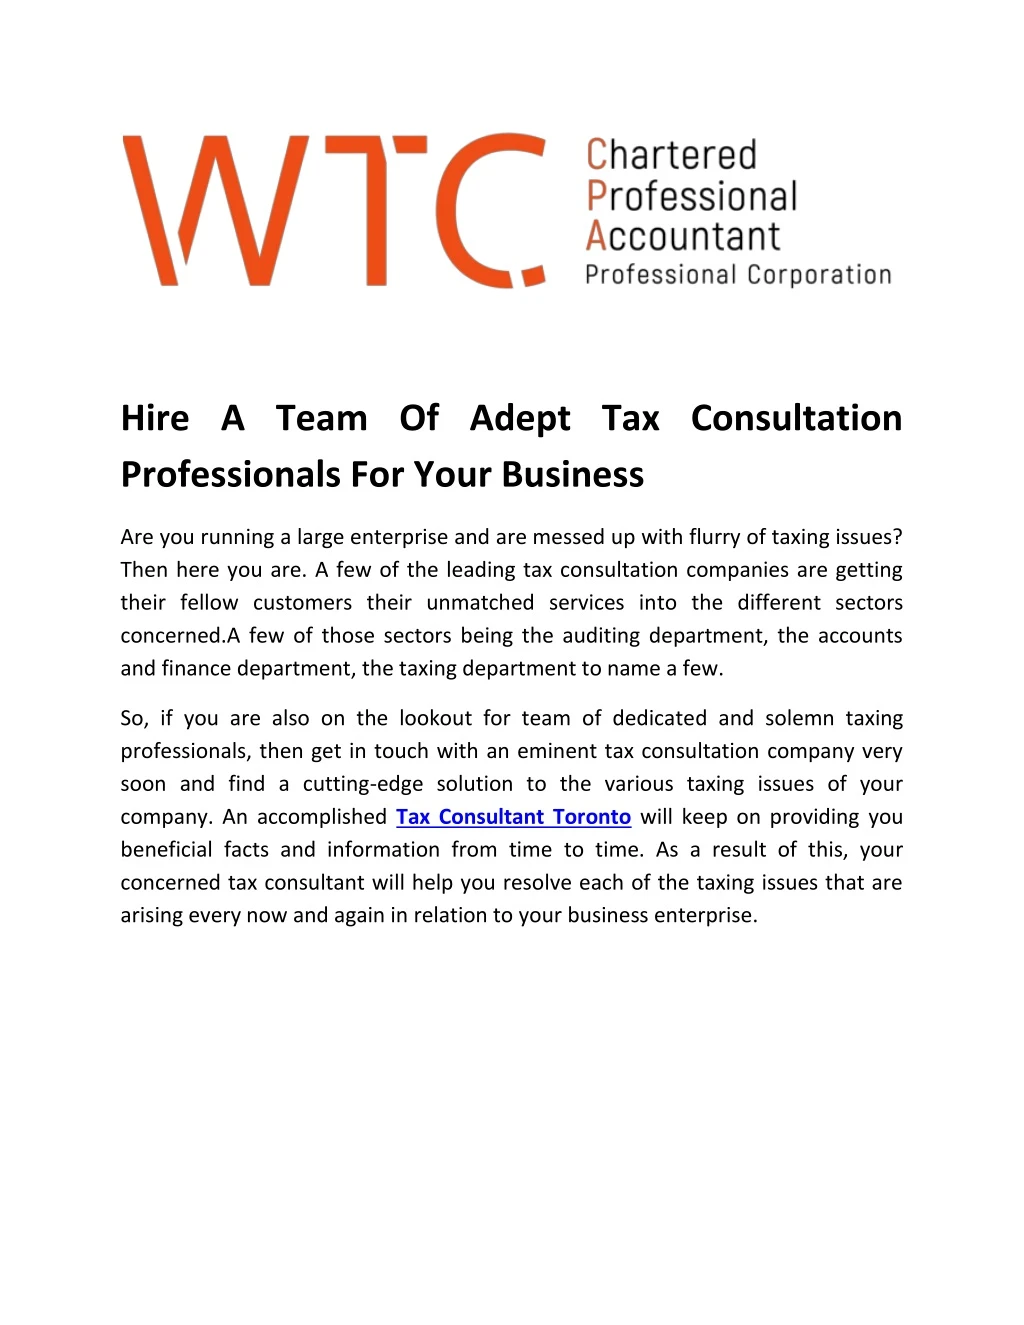 hire a team of adept tax consultation